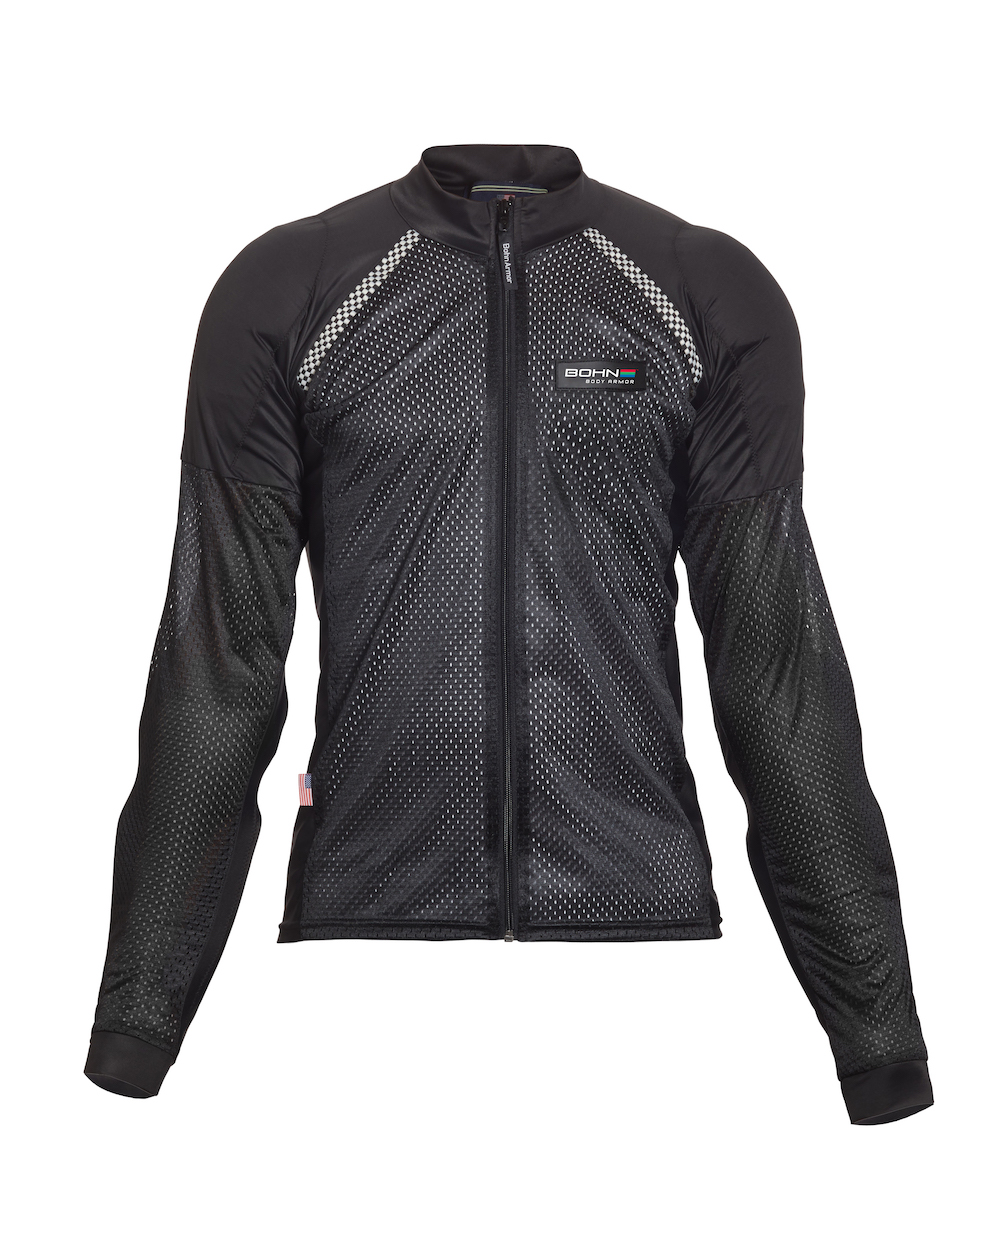 Armored Motorcycle Shirt, Breathable Mesh, XS -4XL